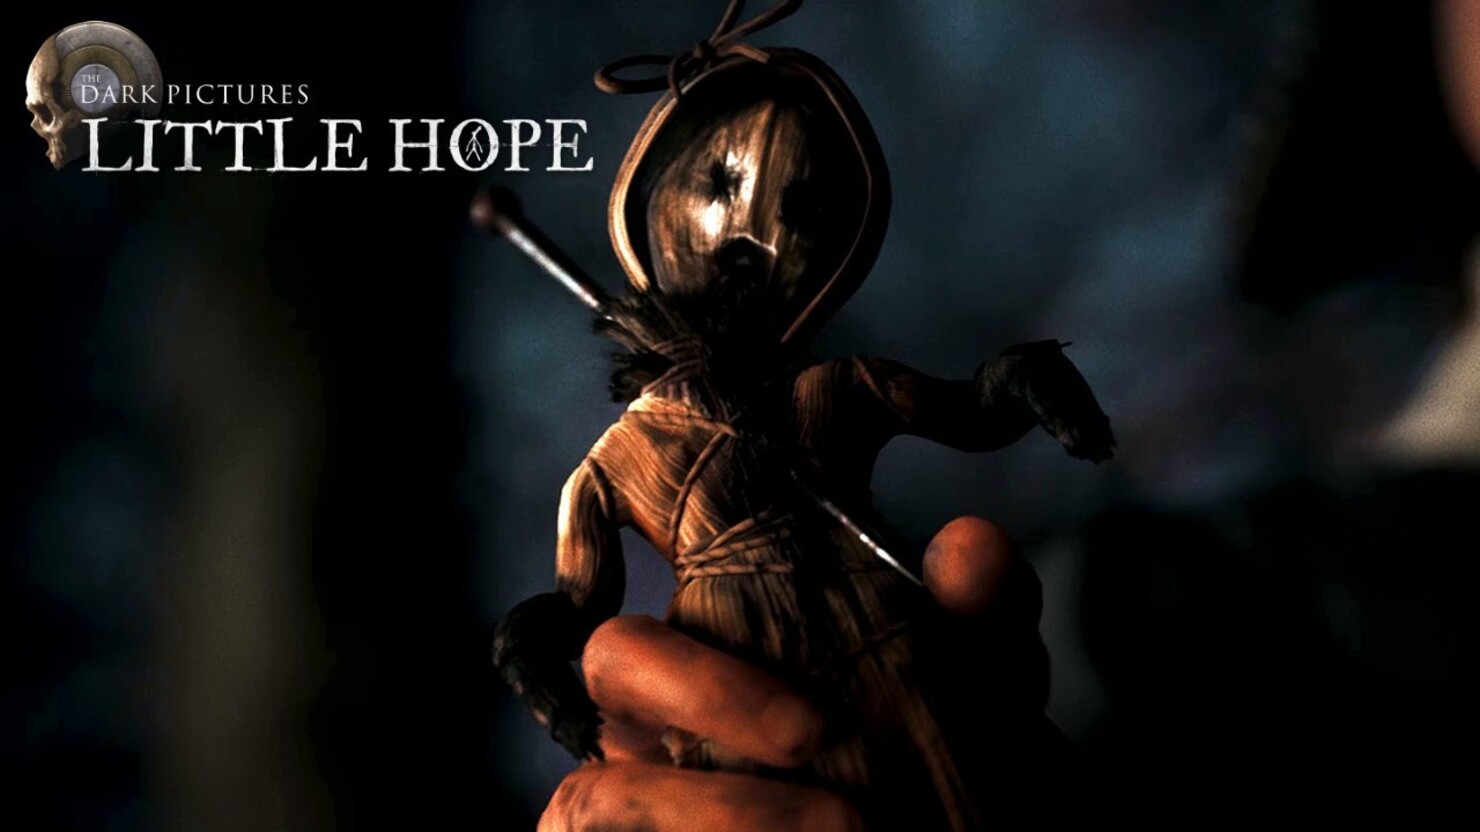 Литл хоуп дарк. Игра the Dark pictures little hope. The Dark pictures Anthology: little hope игра. Город Литтл Хоуп.